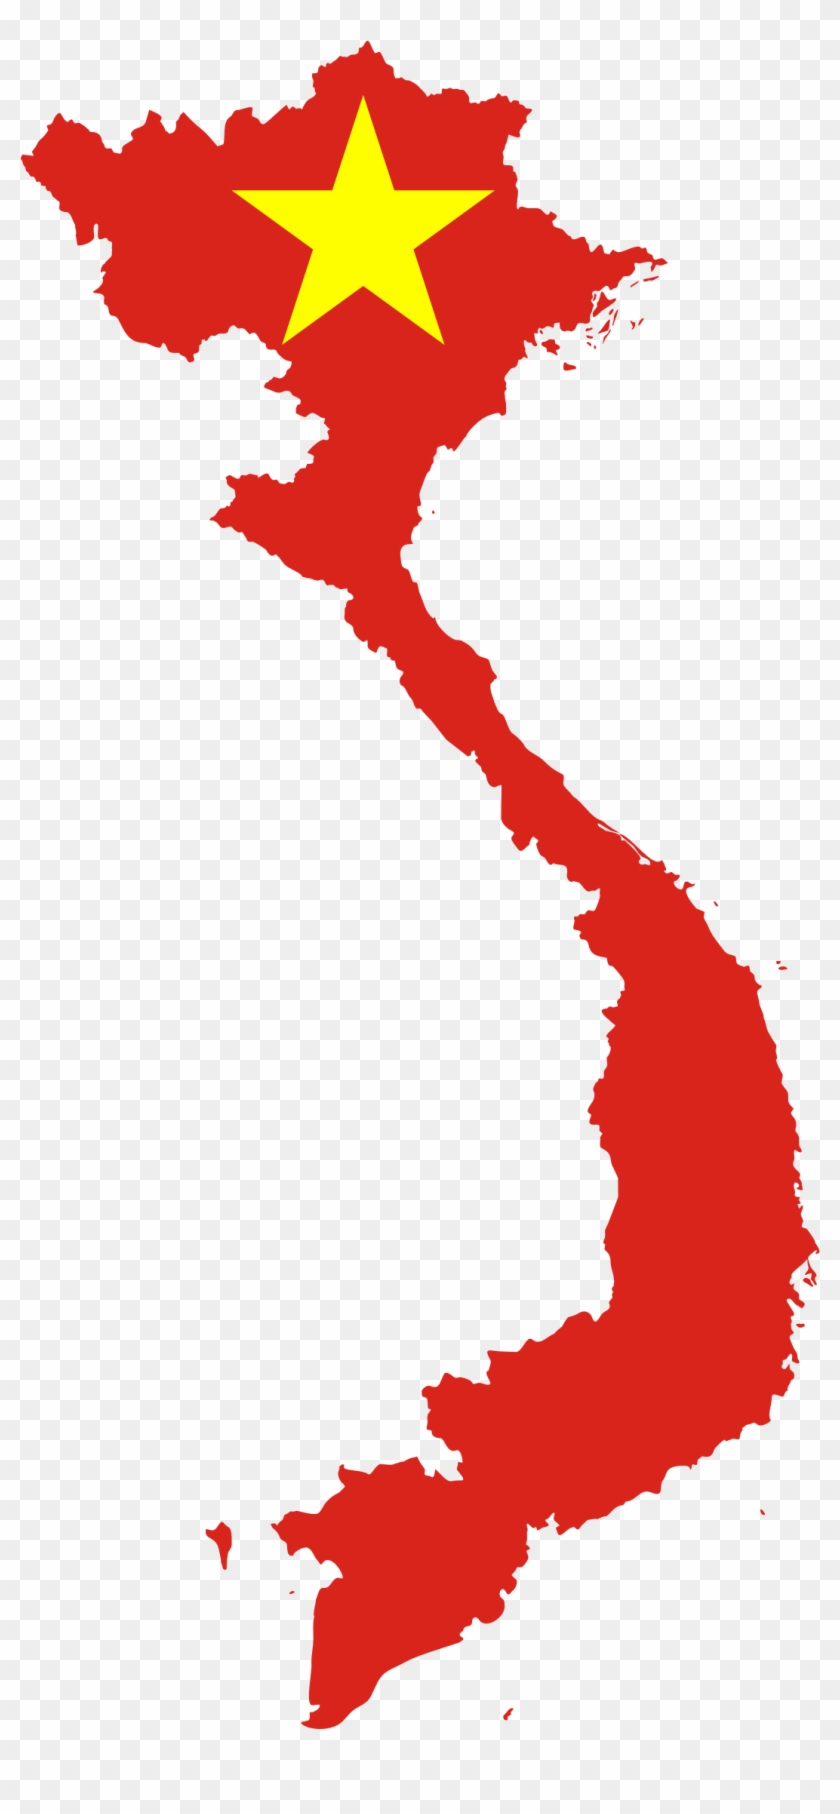 This Free Icons Png Design Of Vietnam Map Flag - Vietnam Map With Flag Clipart #4780812